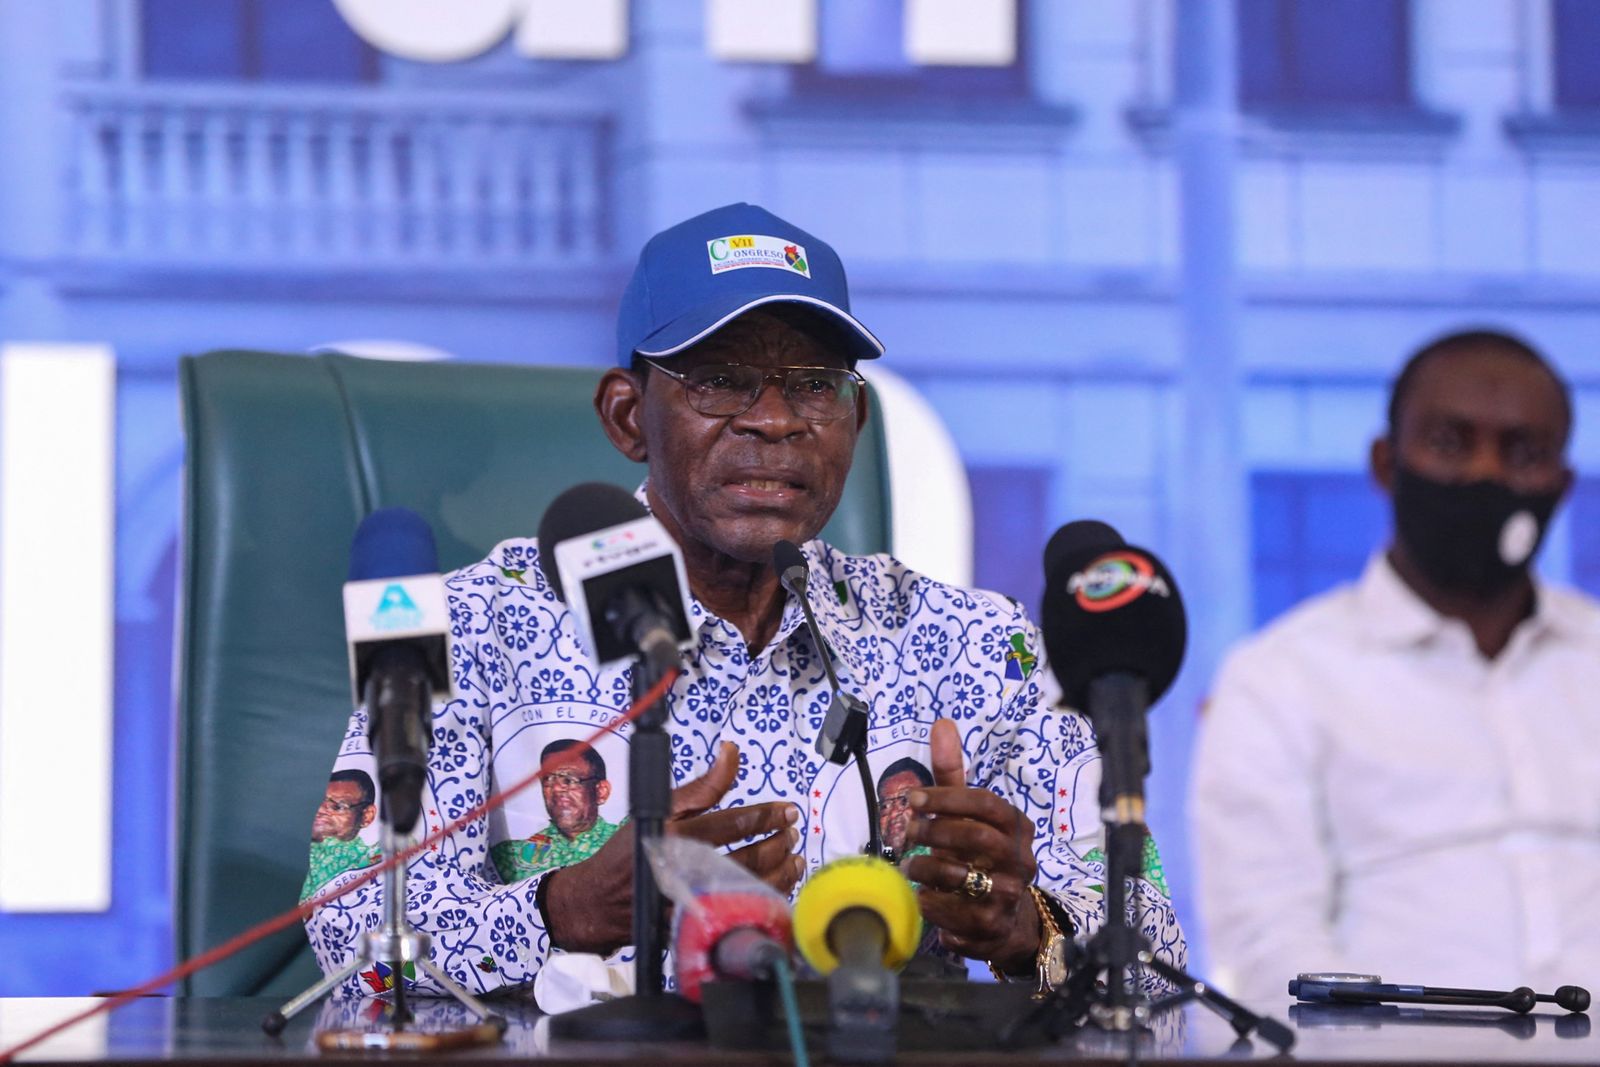 Teodoro Obiang Nguema Mbasogo, President of Equatorial Guinea and president of the Democratic Party of Equatorial Guinea (PDGE), speaks during a press conference at the congress hall in Bata, Equatorial Guinea, on November 25, 2021. (Photo by Steeve JORDAN / AFP) - AFP